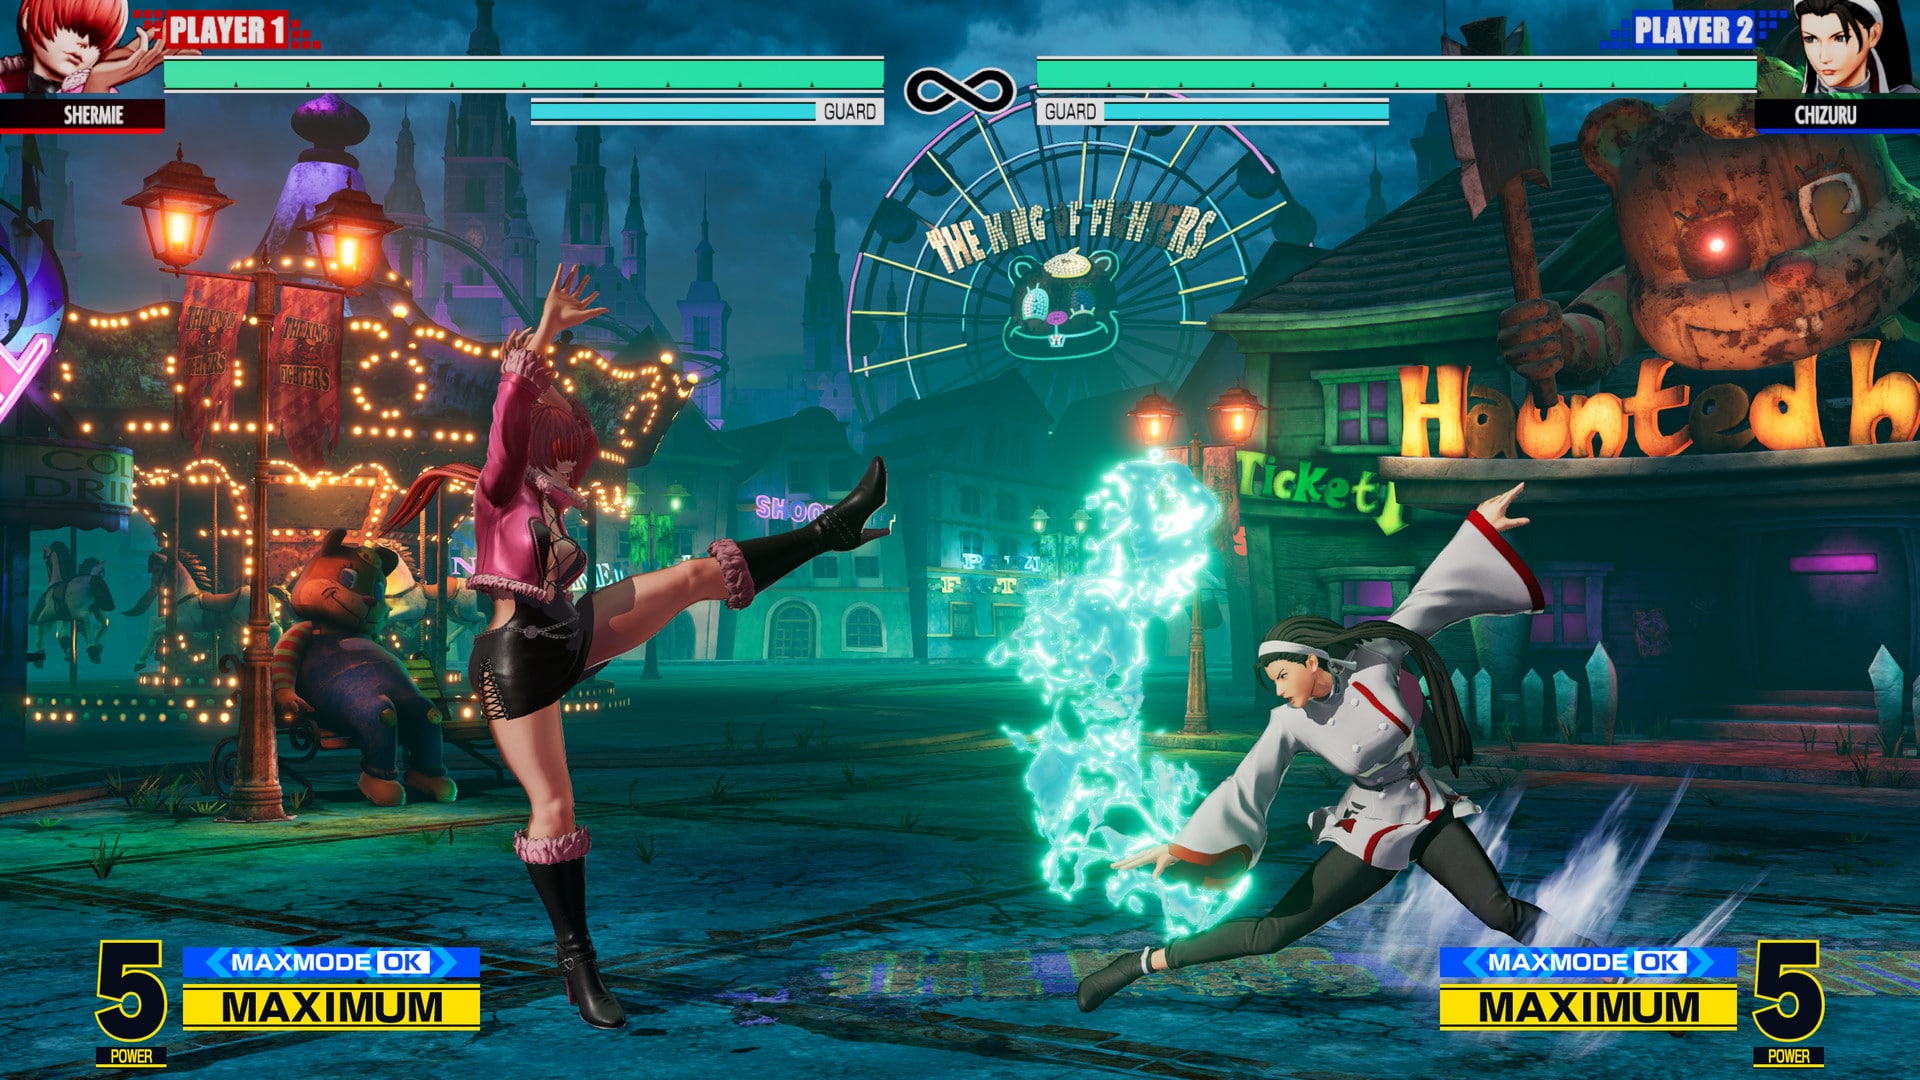 King of Fighters 15 Update 1.02 Brings Fighter Changes This February 18